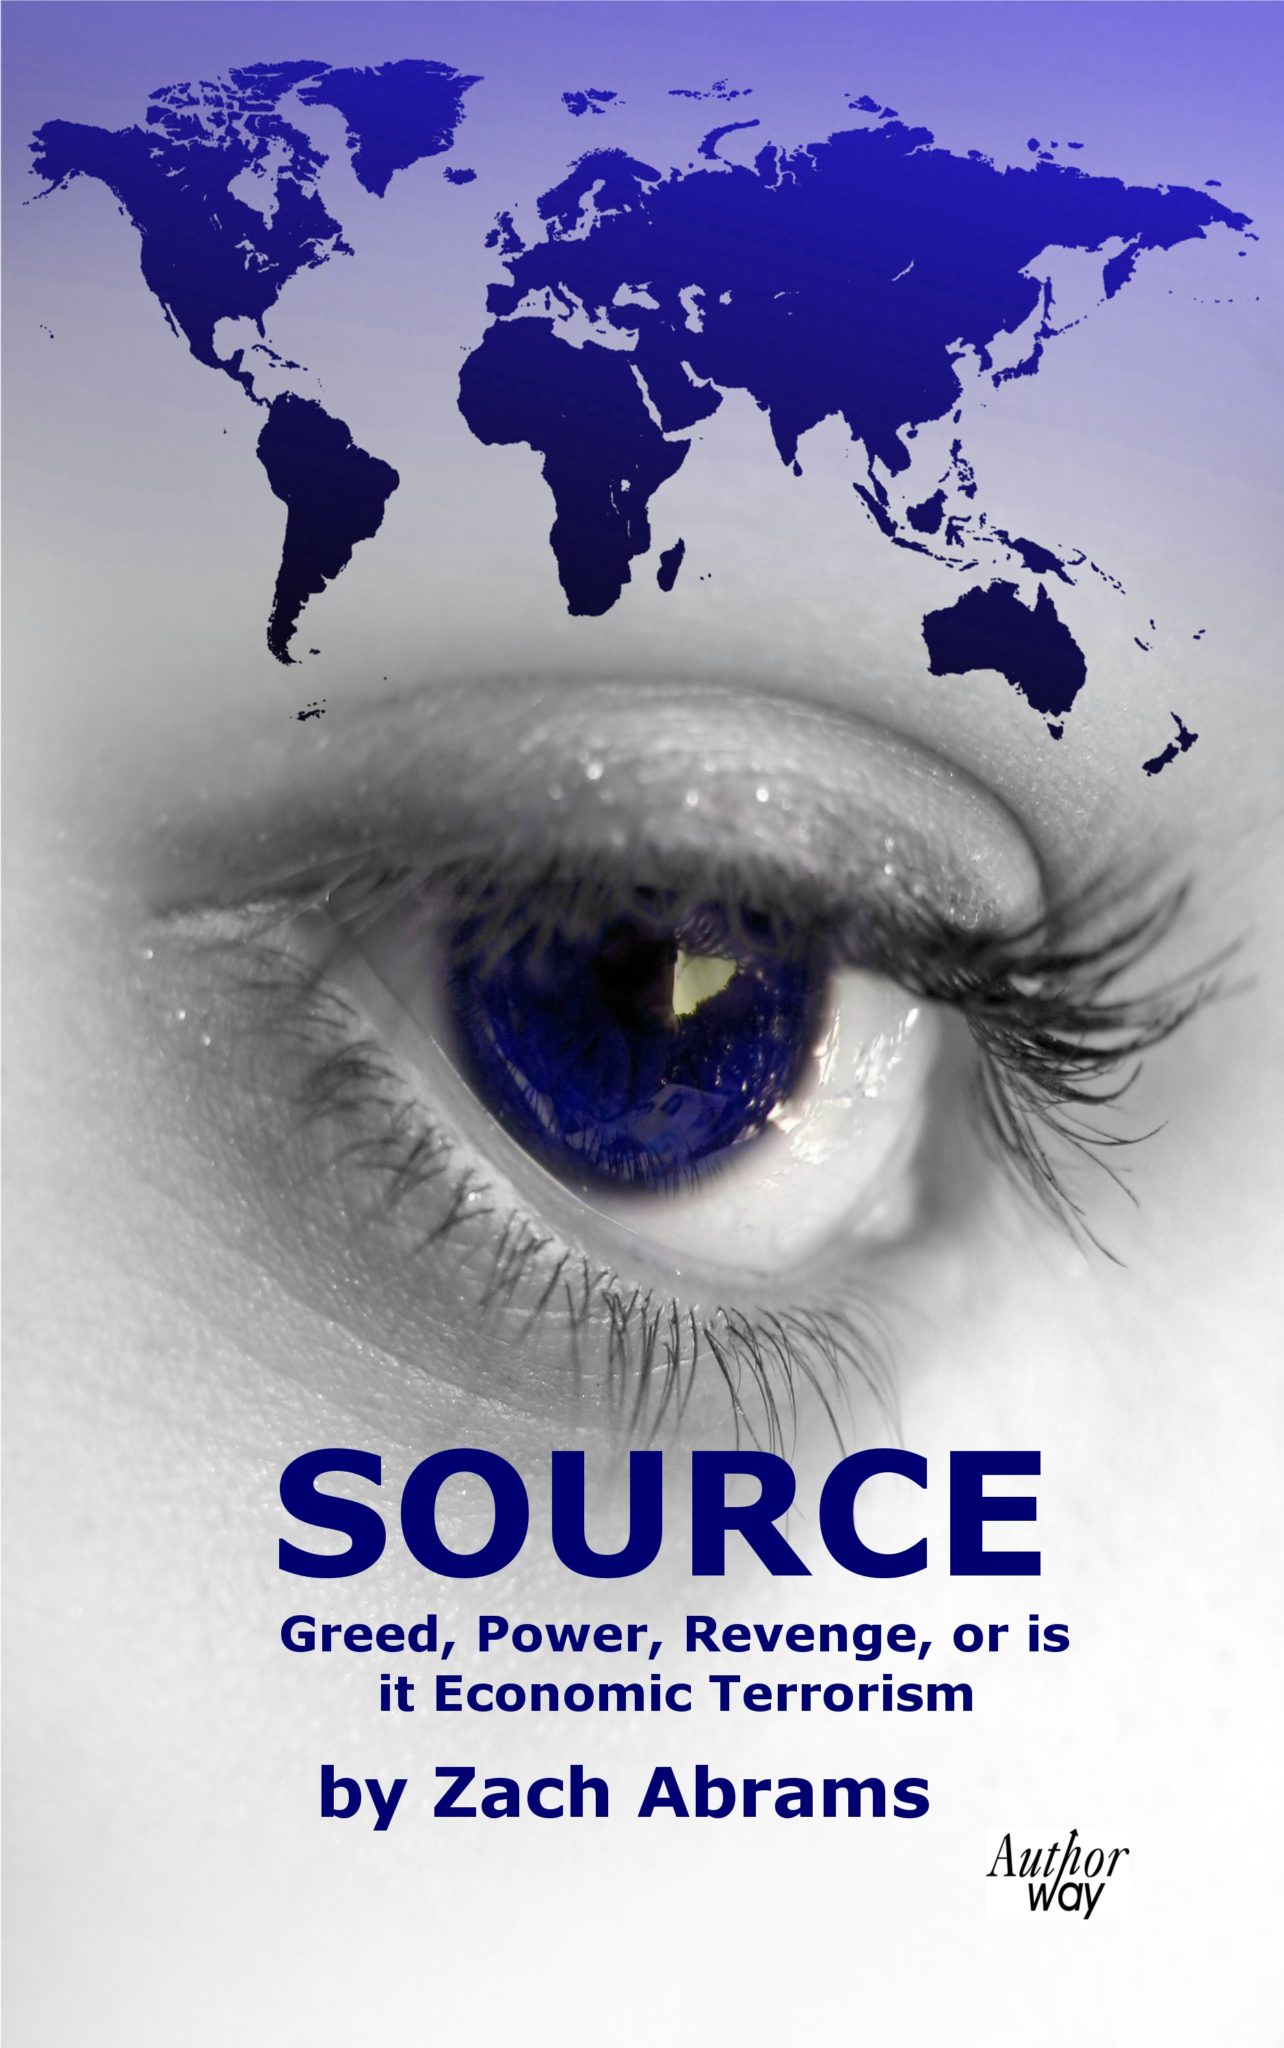 FREE: Source; Greed, Power, revenge, or is it Economic Terrorism by Zach Abrams